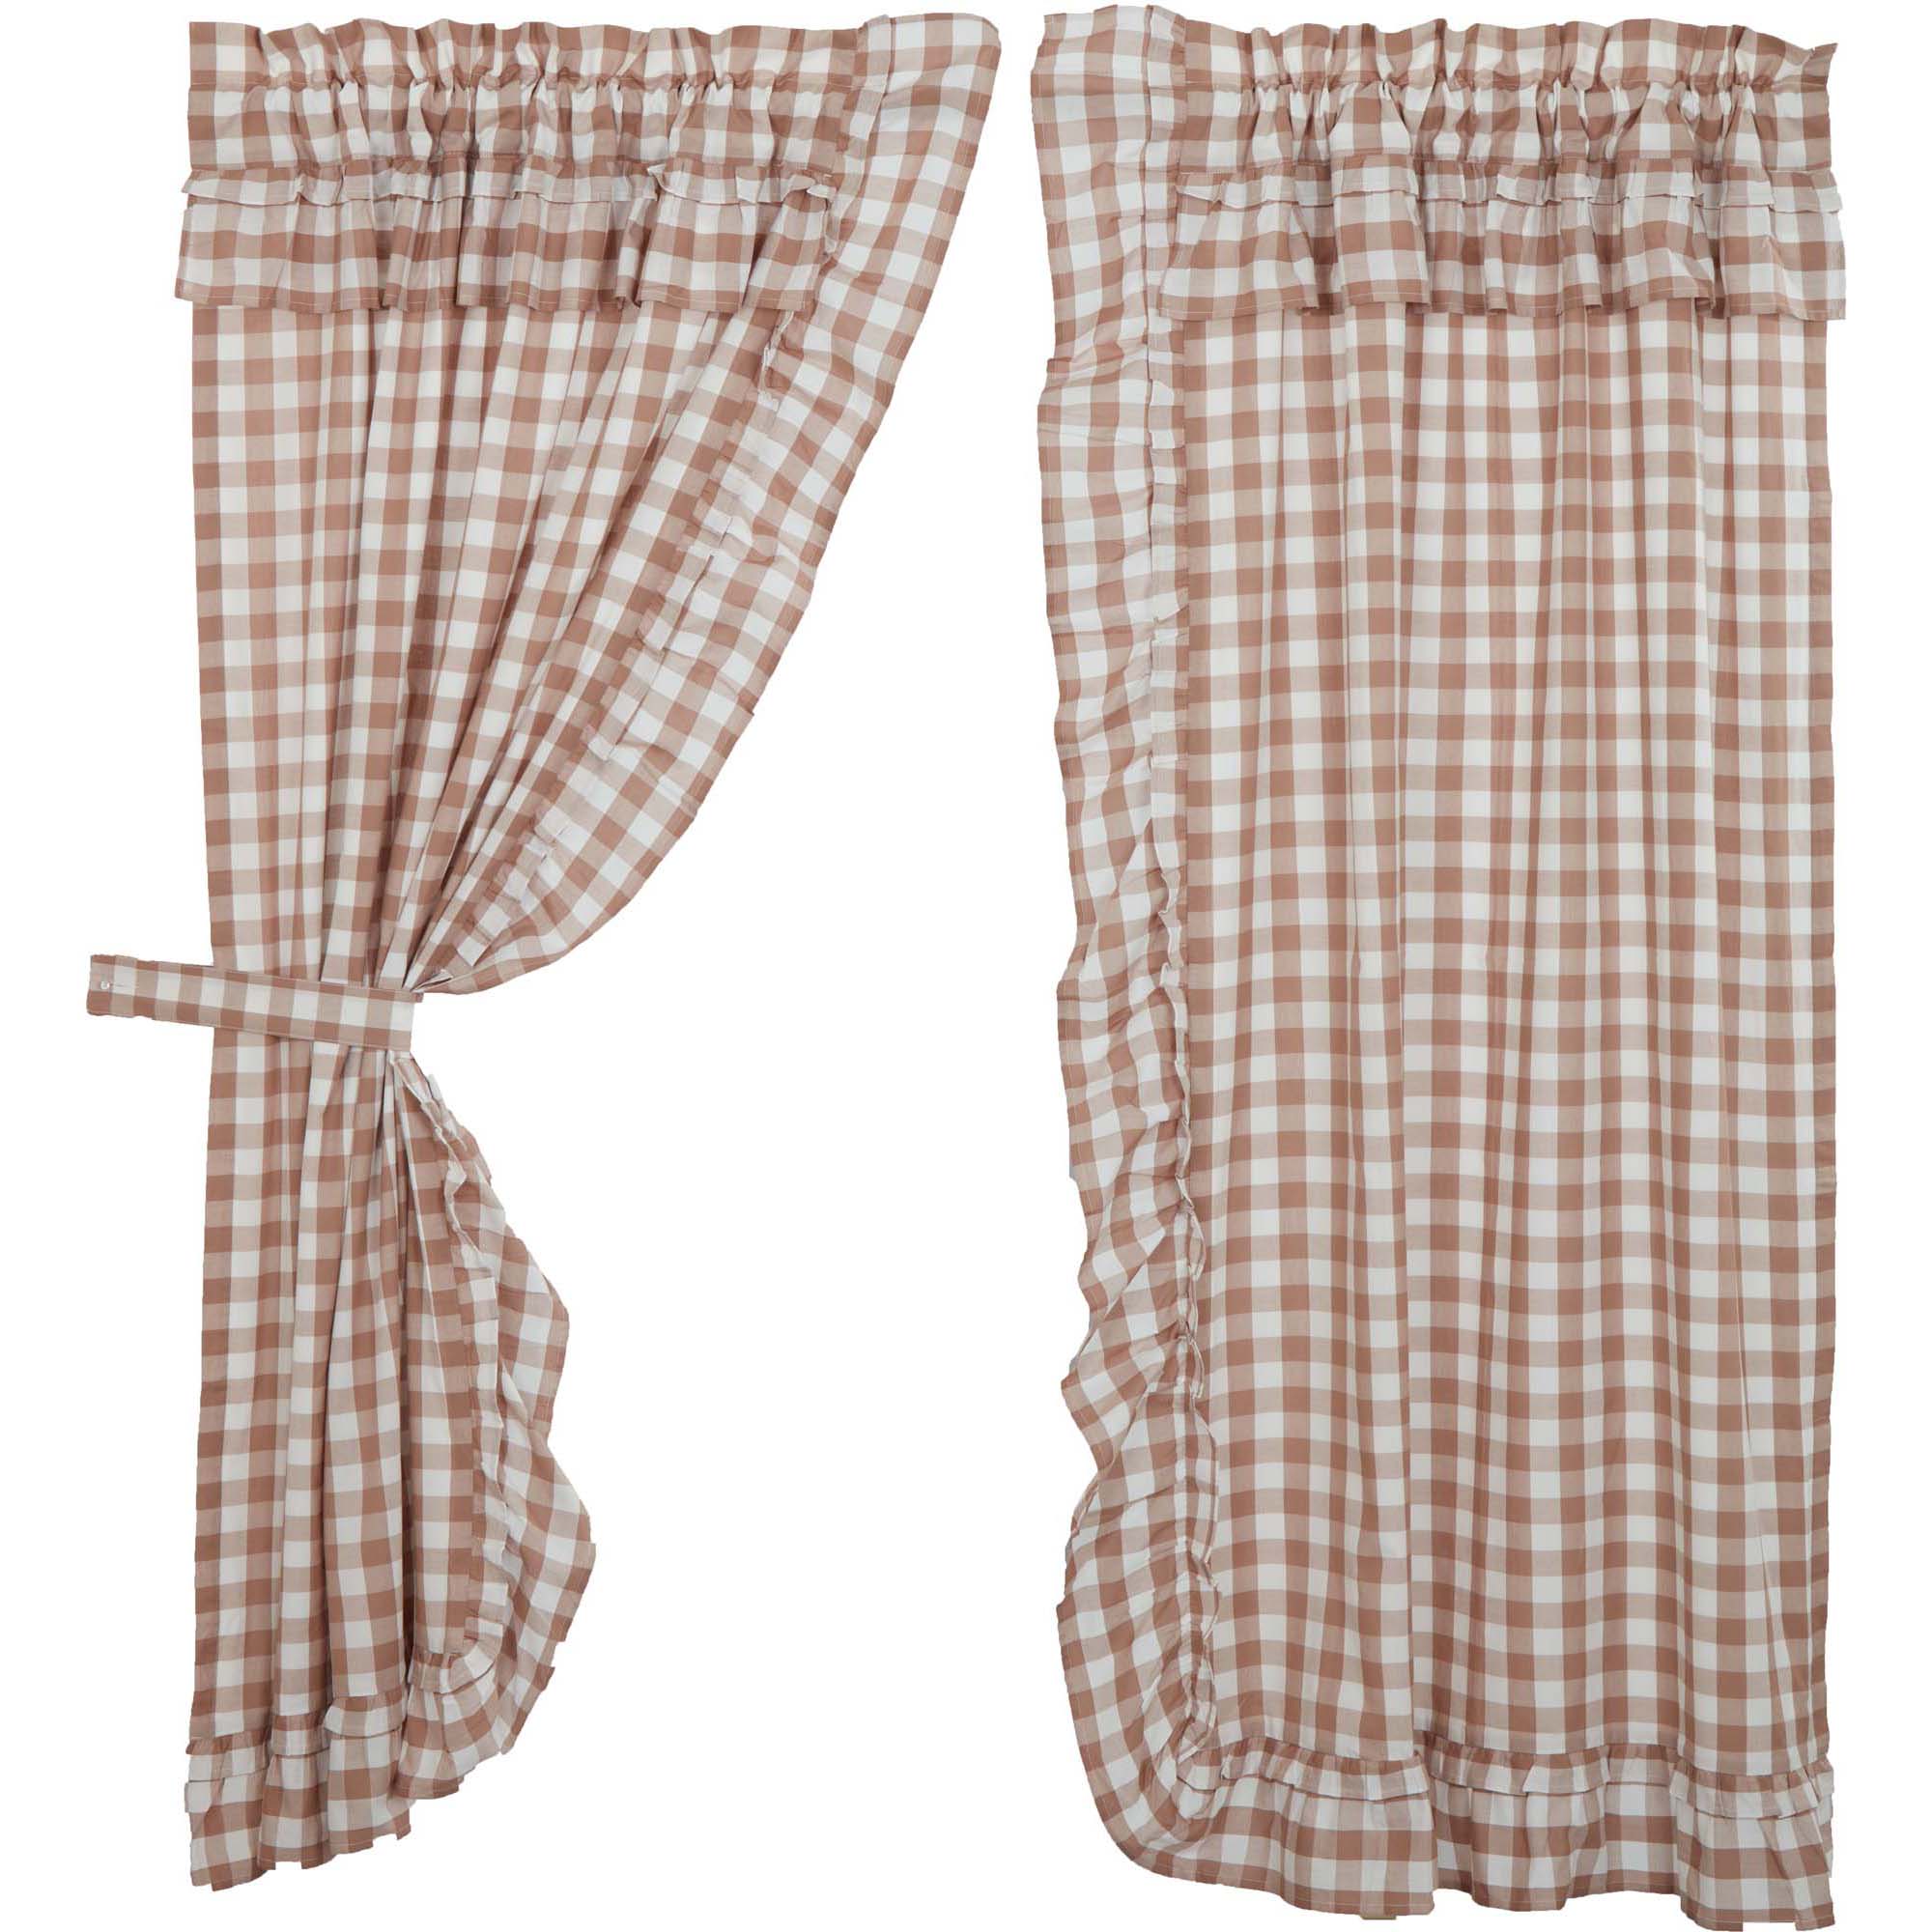 April & Olive Annie Buffalo Portabella Check Ruffled Short Panel Set of 2 63x36 By VHC Brands